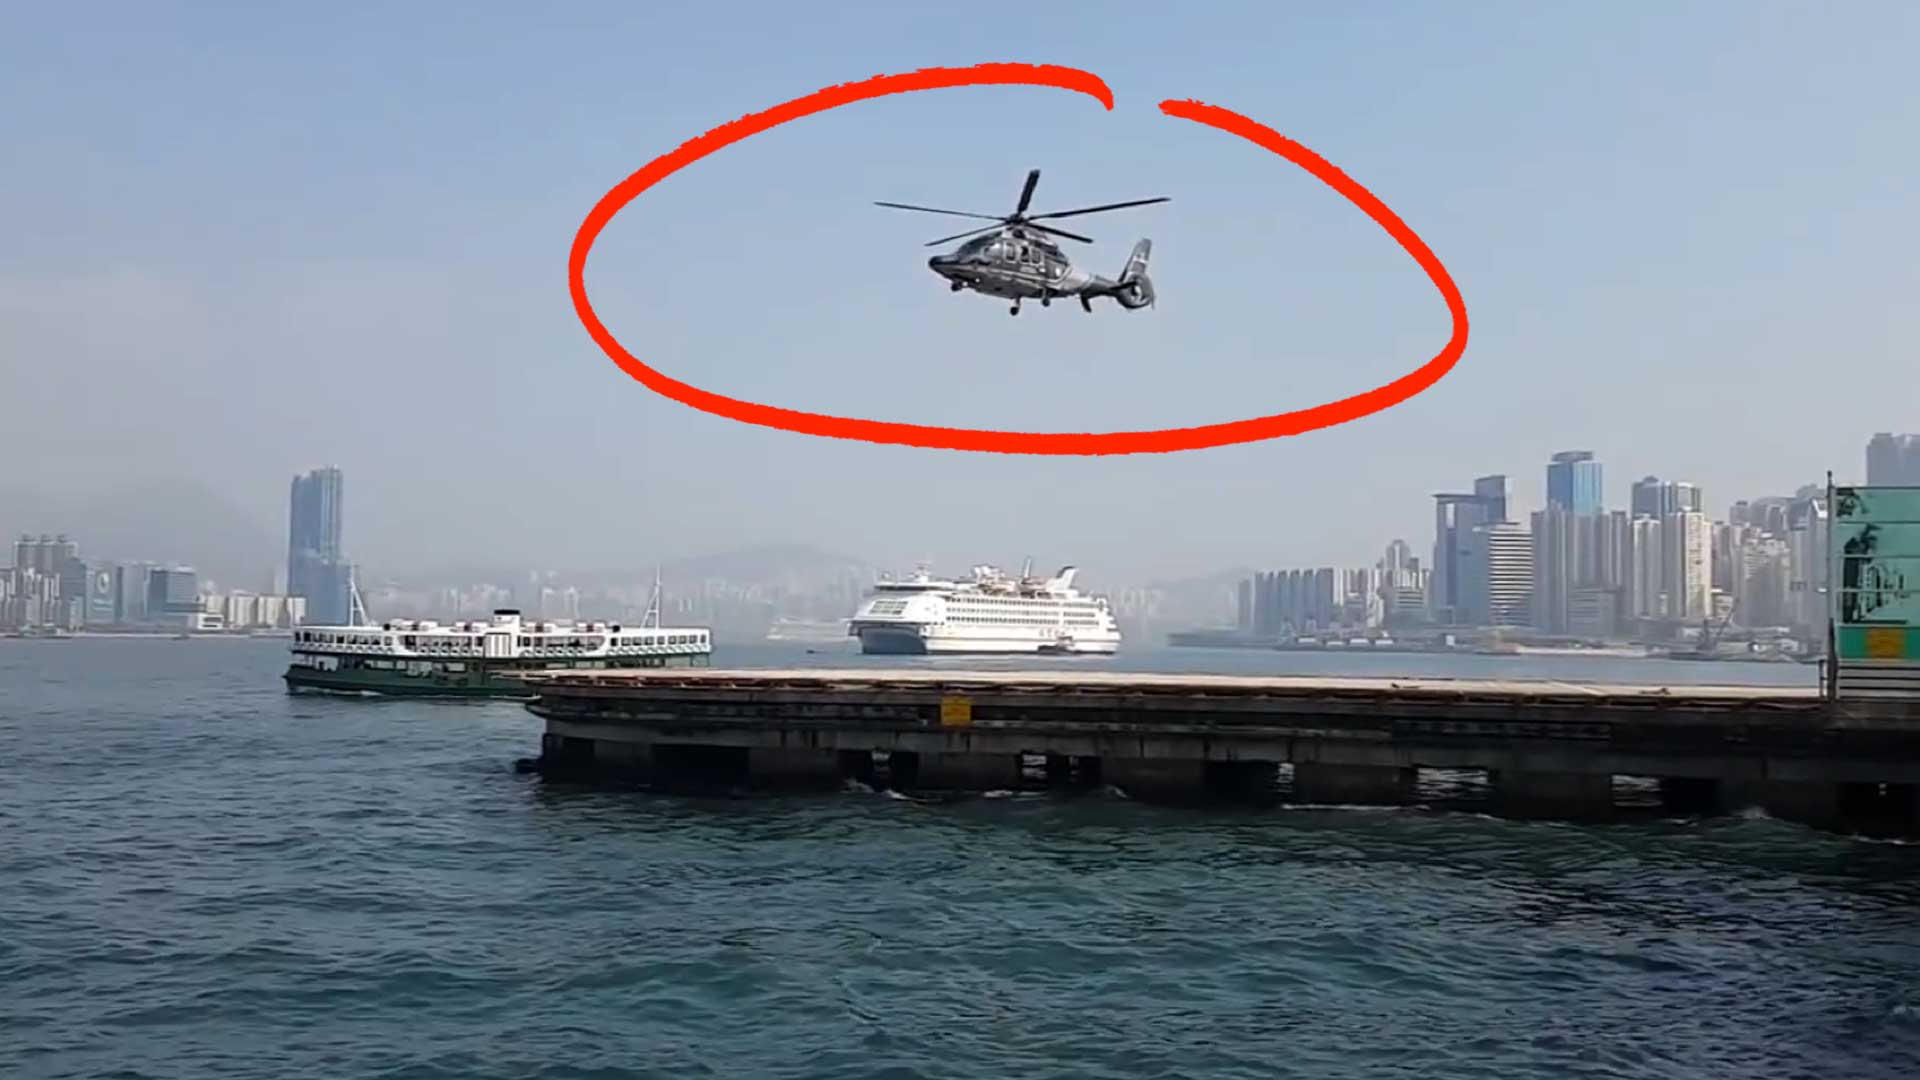 A Camera Shutter Synchronized To A Helicopter's Rotor Speed Confuses Internet